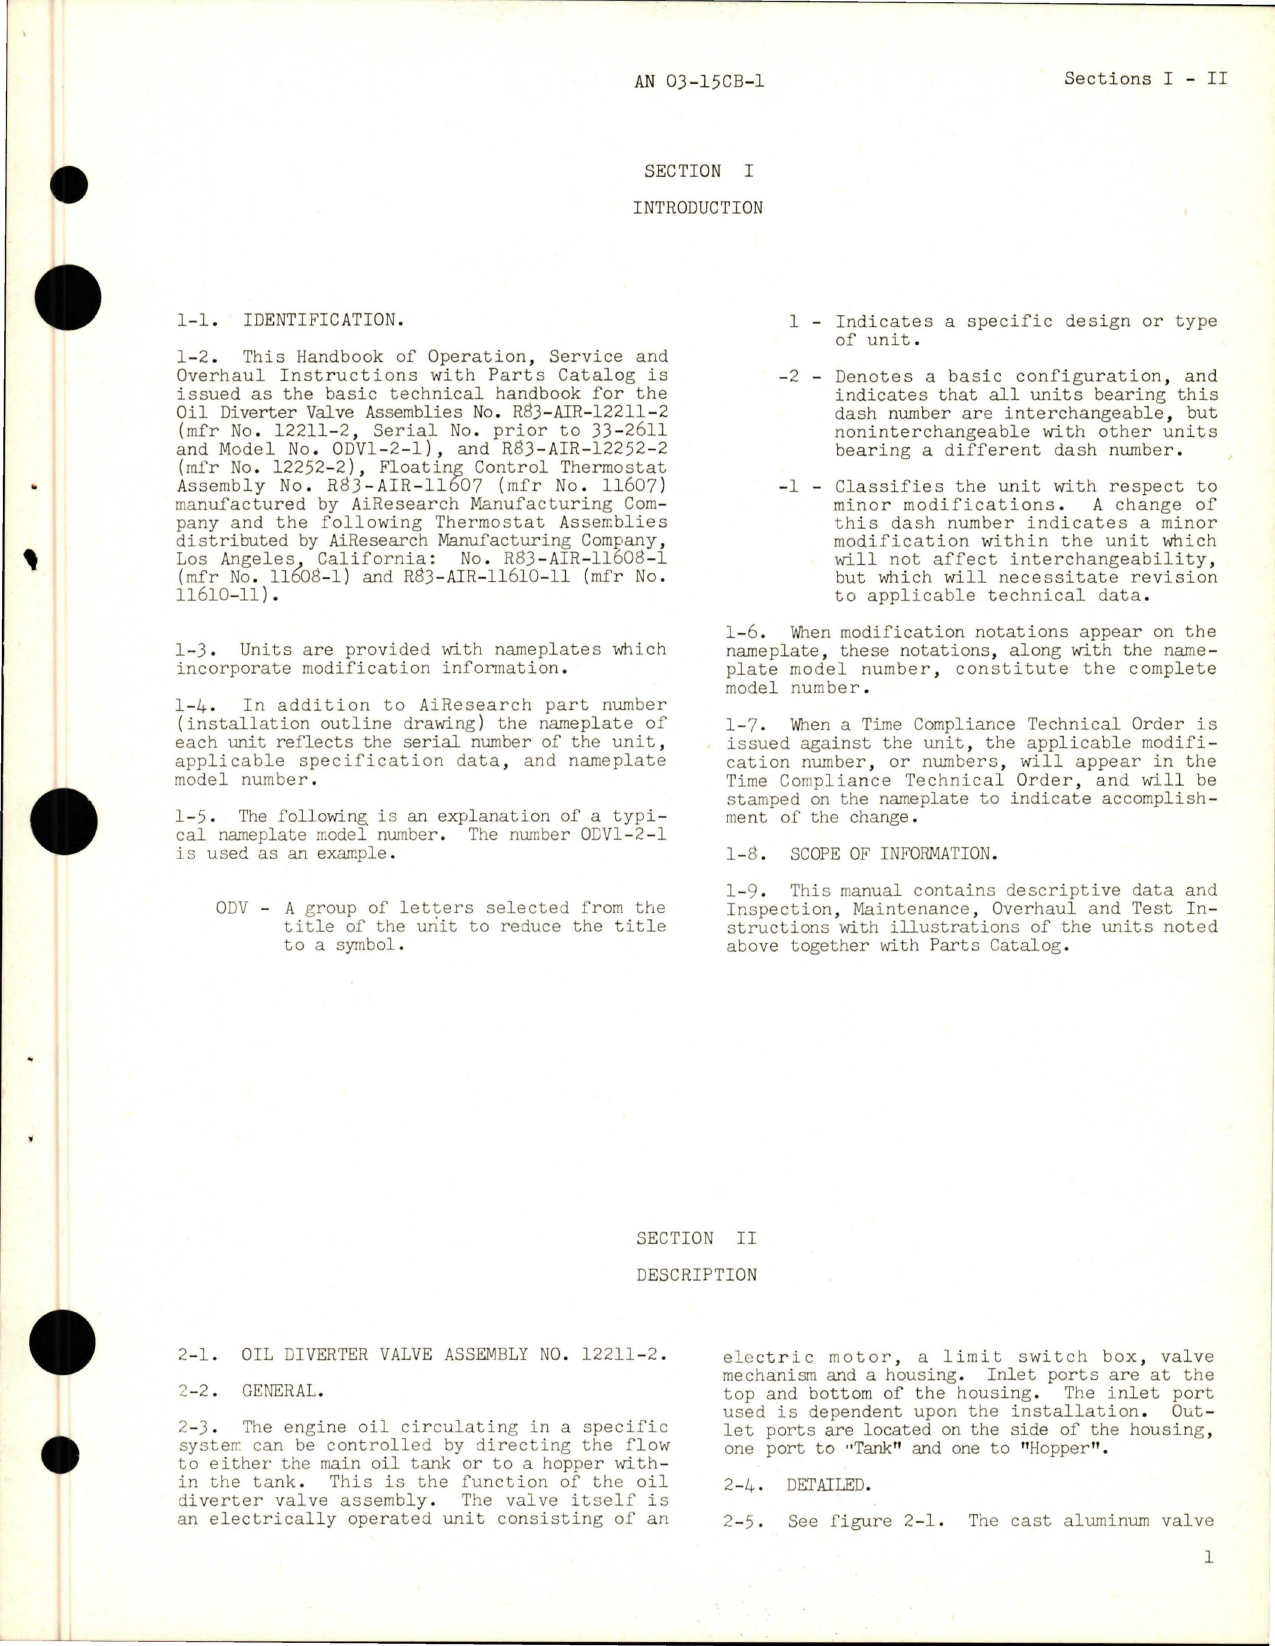 Sample page 9 from AirCorps Library document: Operation, Service, Overhaul Instructions for Oil Diverter Valve Assembly - Part 12211-2, 12252-2, Floating Control Thermostat Assembly - Part 11607, Thermostat Assembly - Parts 11608-1, 11610-11